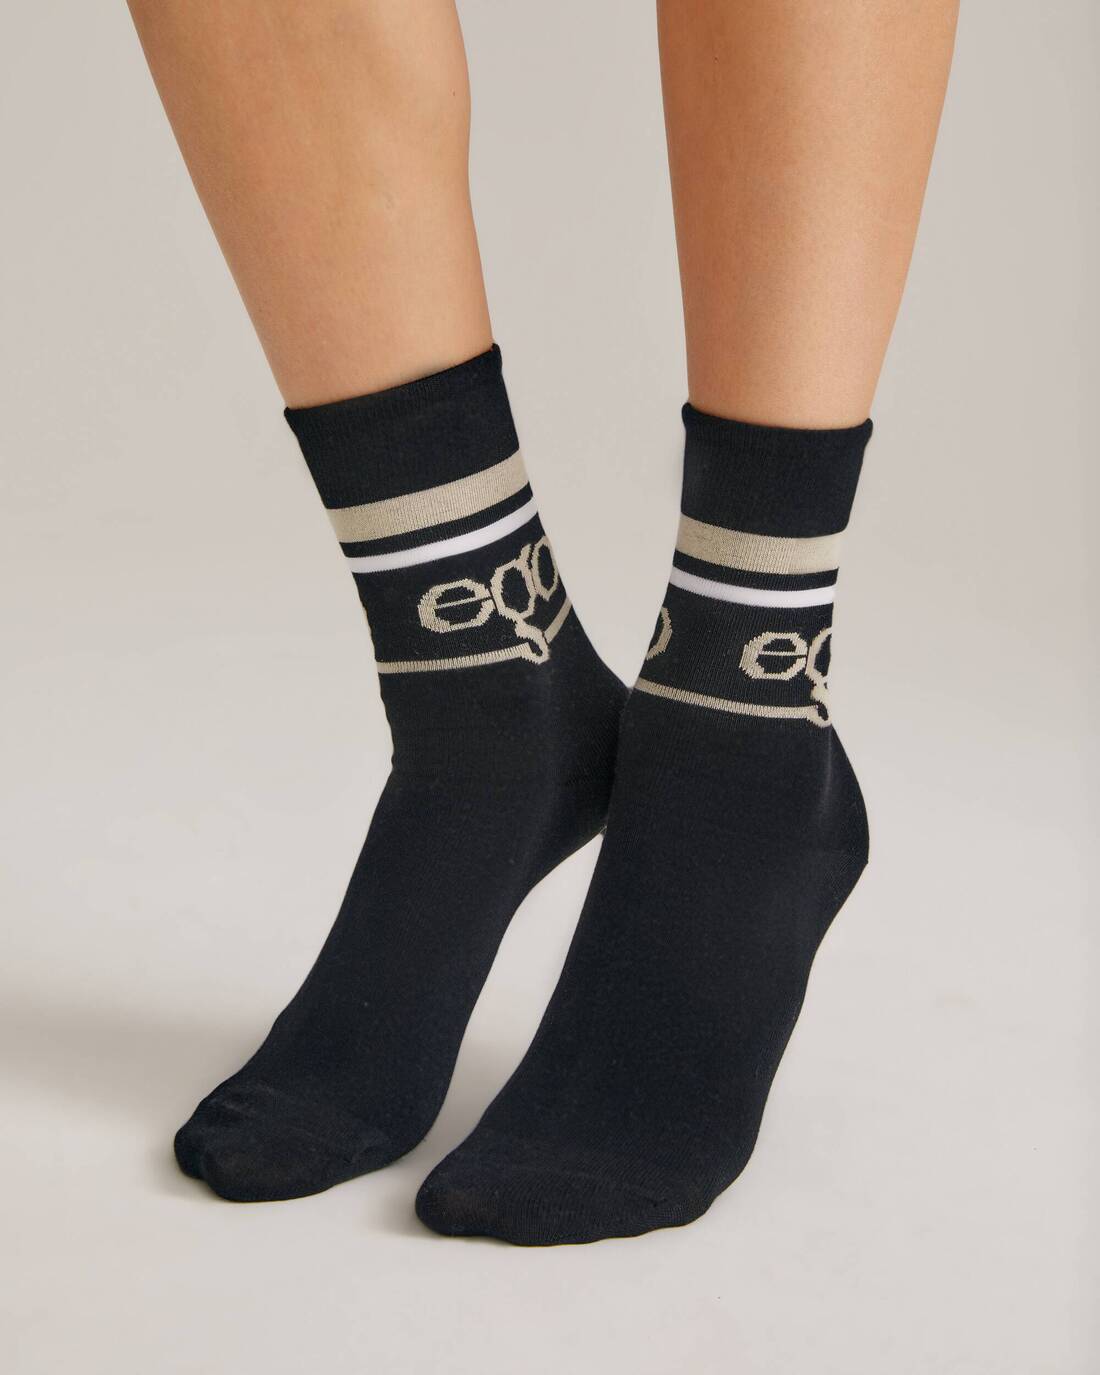 Socks with Ego embroidery